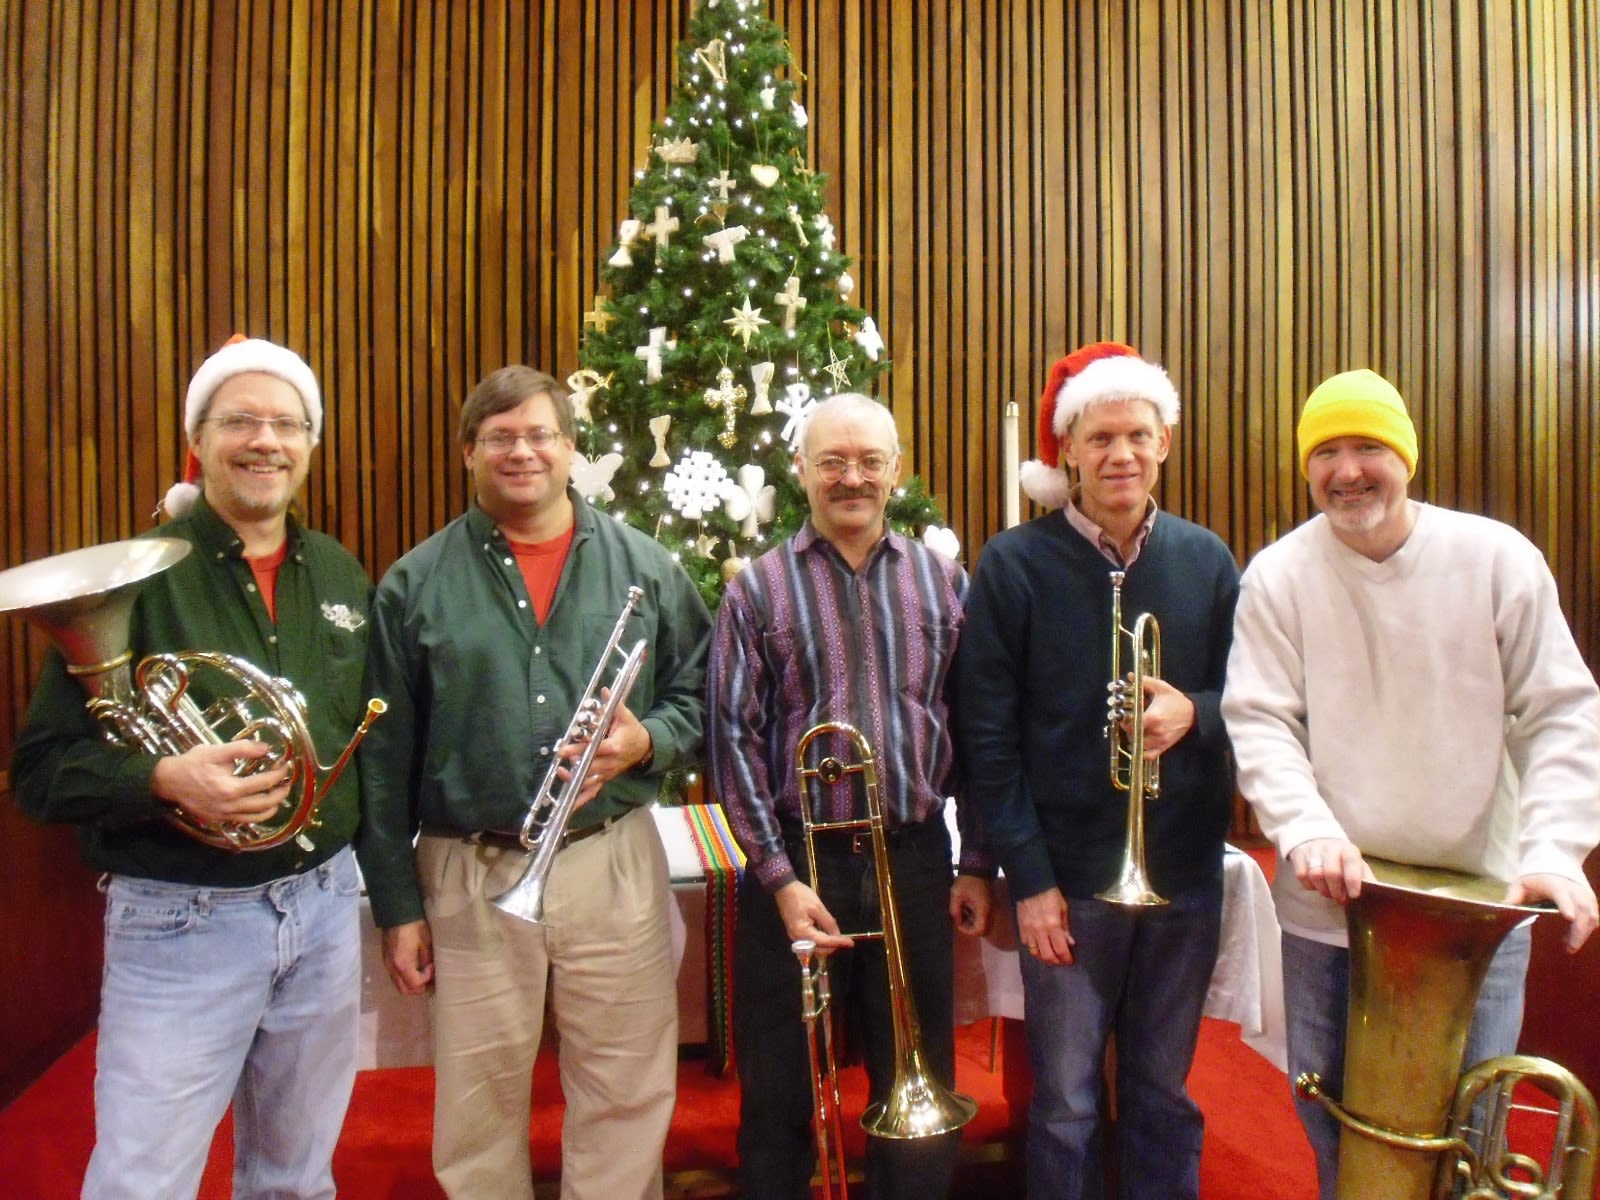 Pinnacle Brass: Tom Hale (ASO principal horn), Tim Shaffer (me, ASO third trumpet), Randy Zimmerman (local freelancer), Bob Cannon (ASO principal trumpet), Kerry Williams (local freelancer). This is an old photo, maybe even 10 years old. My hair is a lot grayer now. And a lot shorter. 